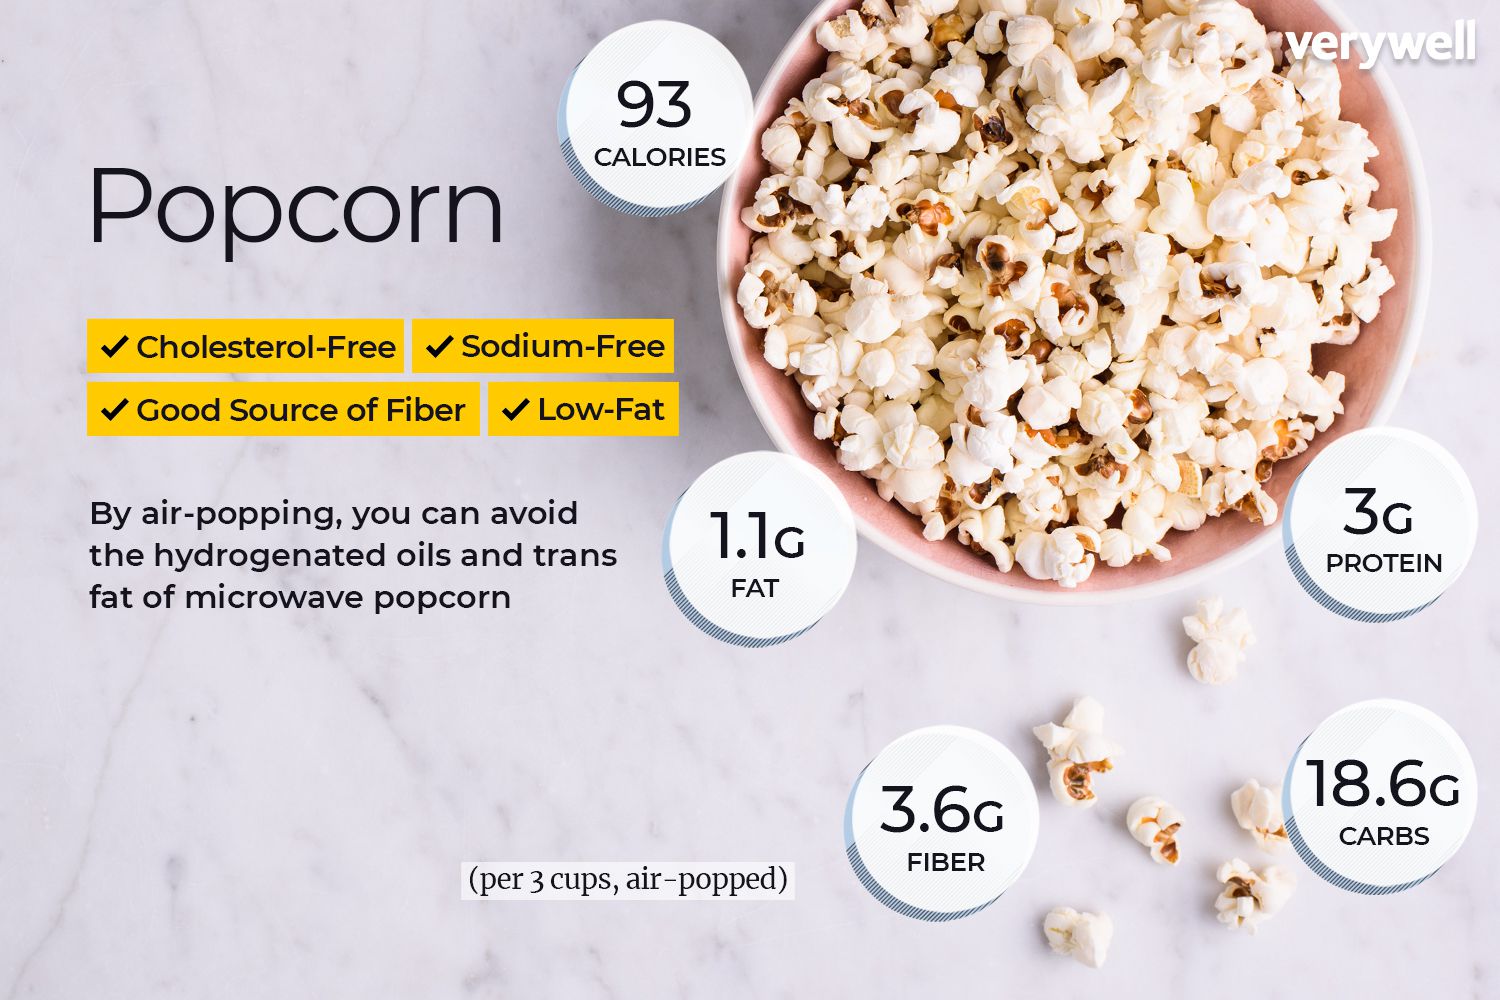 How Many Calories In One Popcorn?